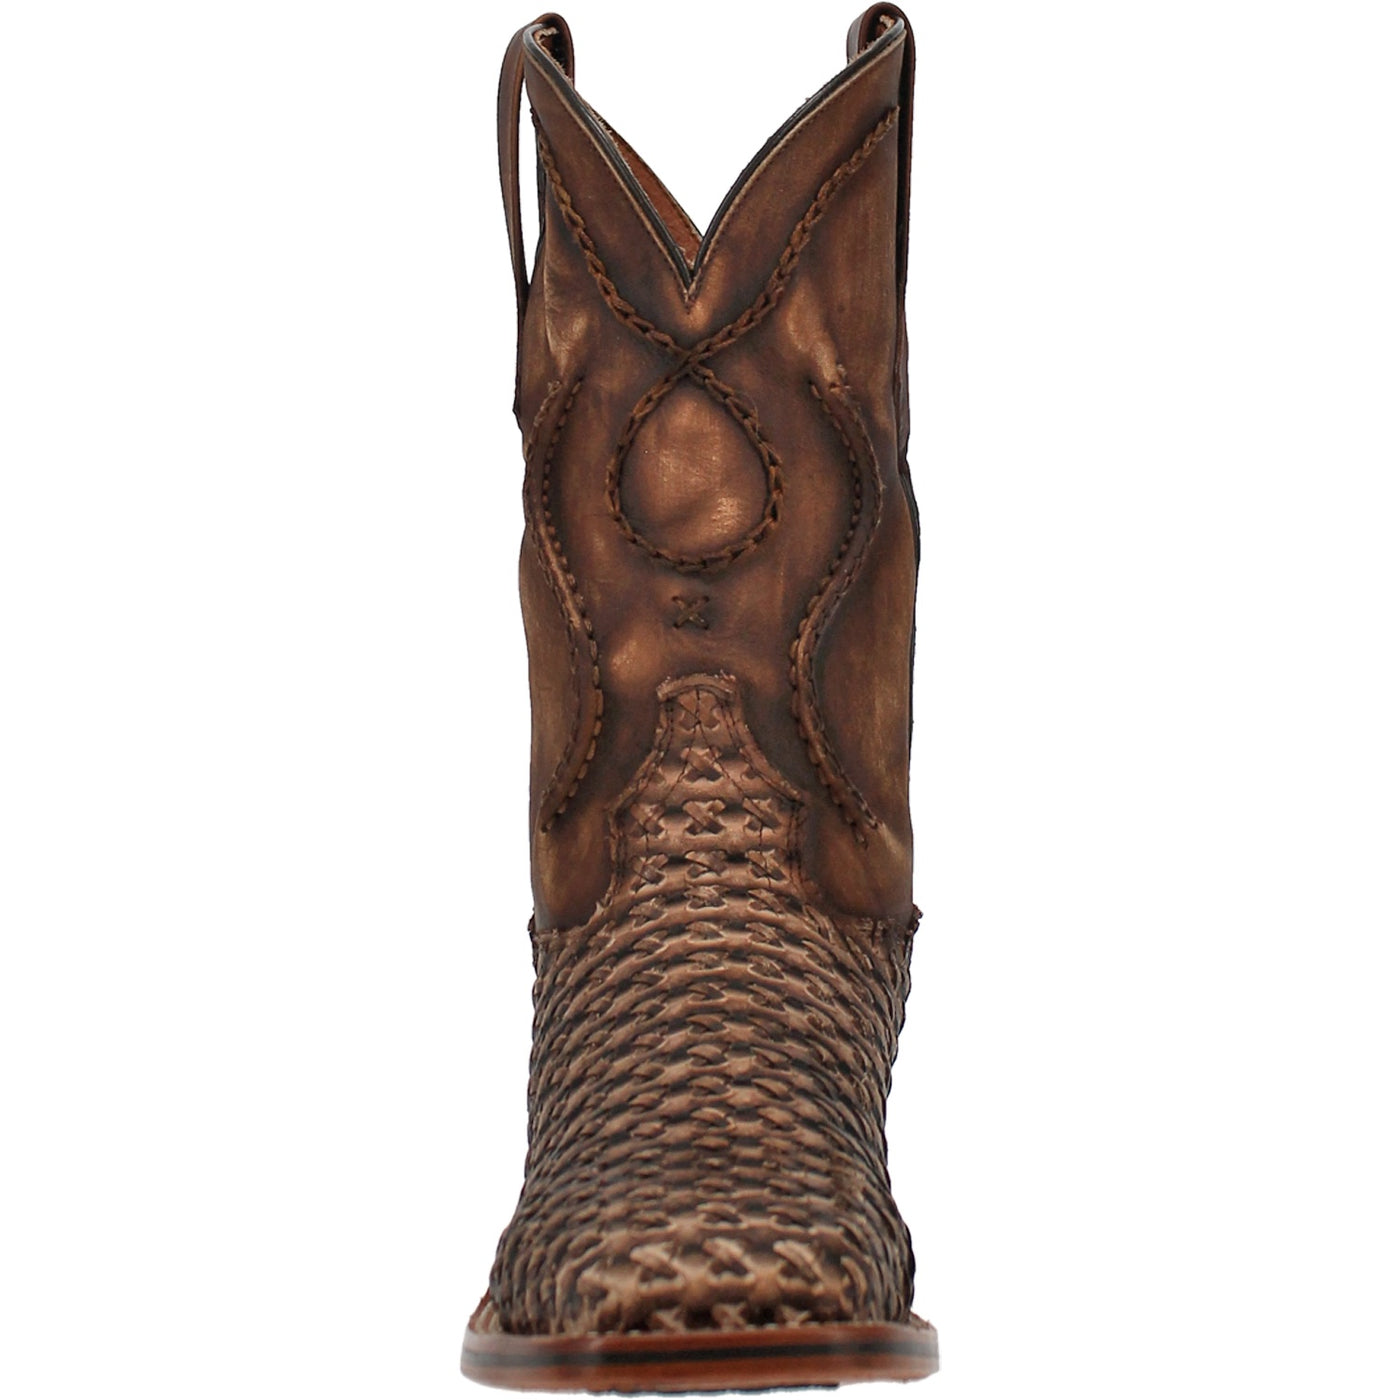 Craftmanship is front and center on the Cowboy Certified Stanley boot. The tan distressed upper has hand corded leather lacing. The foot is an intricate eye-catching woven leather design. The Soft Strike removable insert gives comfort from the first step. Featuring our popular broad square toe, stockman heel and long-wearing Cowboy Certified outsole. Innovative western design from top to toe.  Style: DP4903